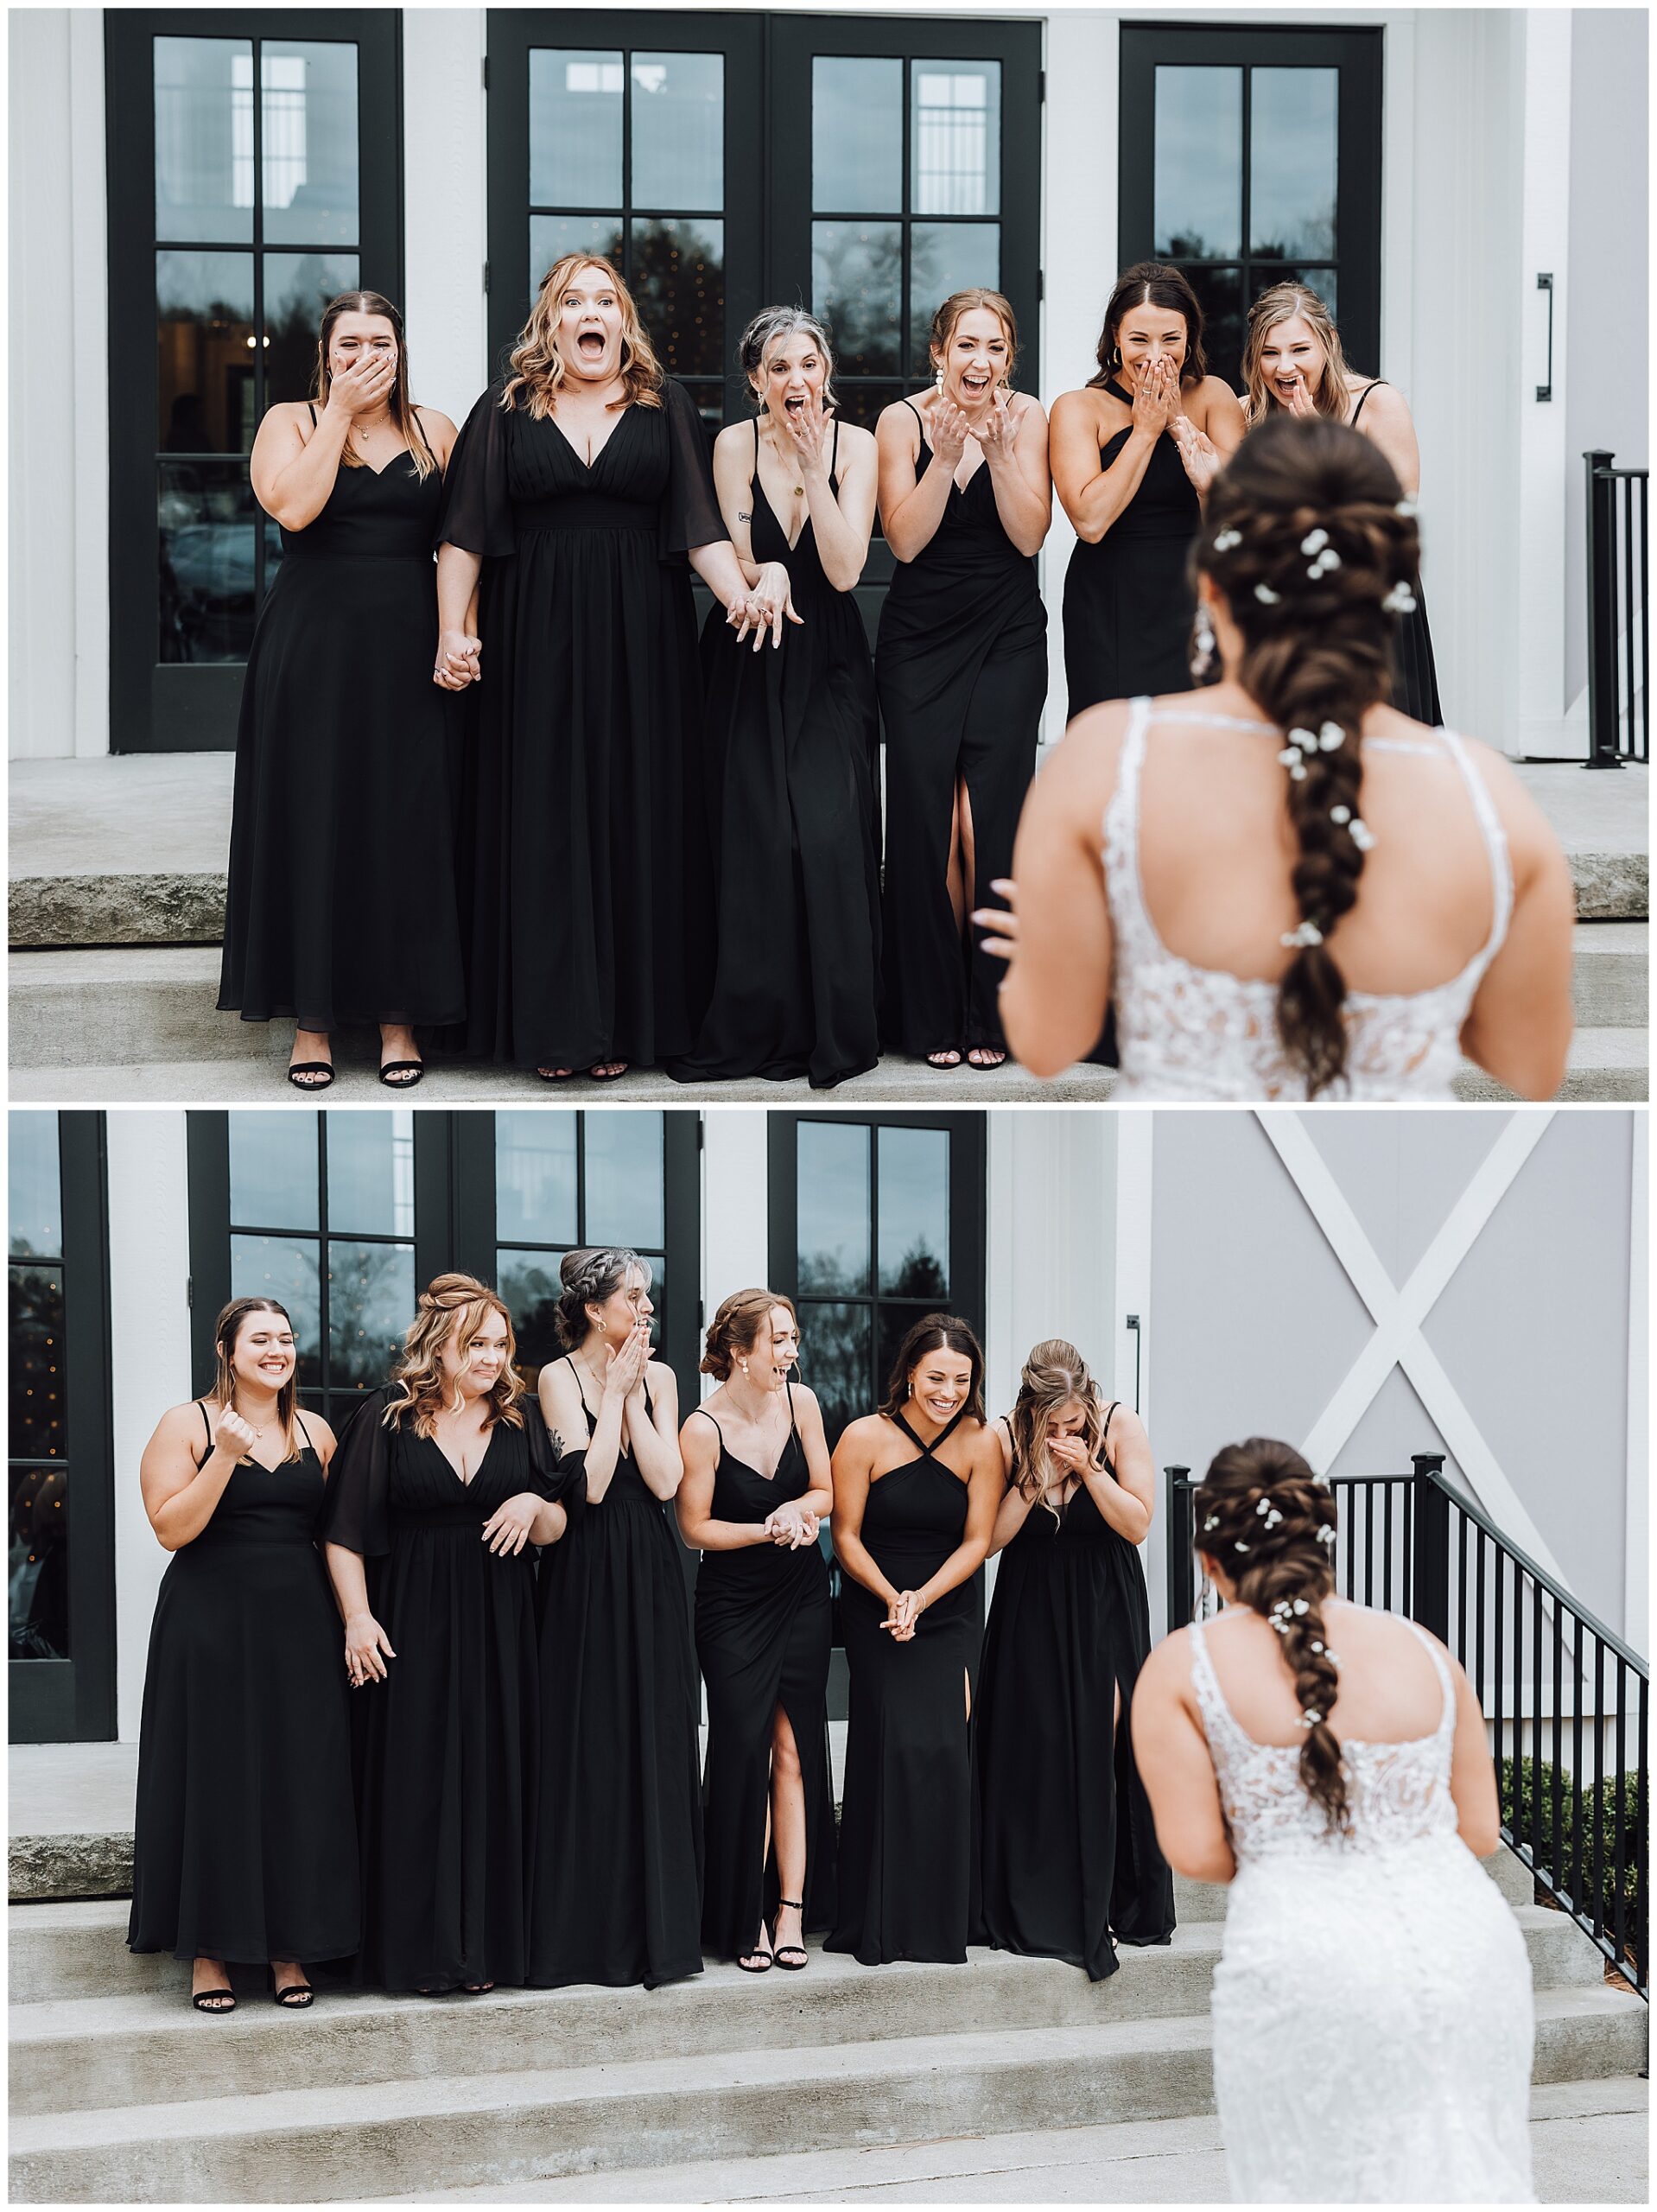 A bridal party in all black dresses reacts after seeing the bride for the first time on the steps of The Venue at Birchwood